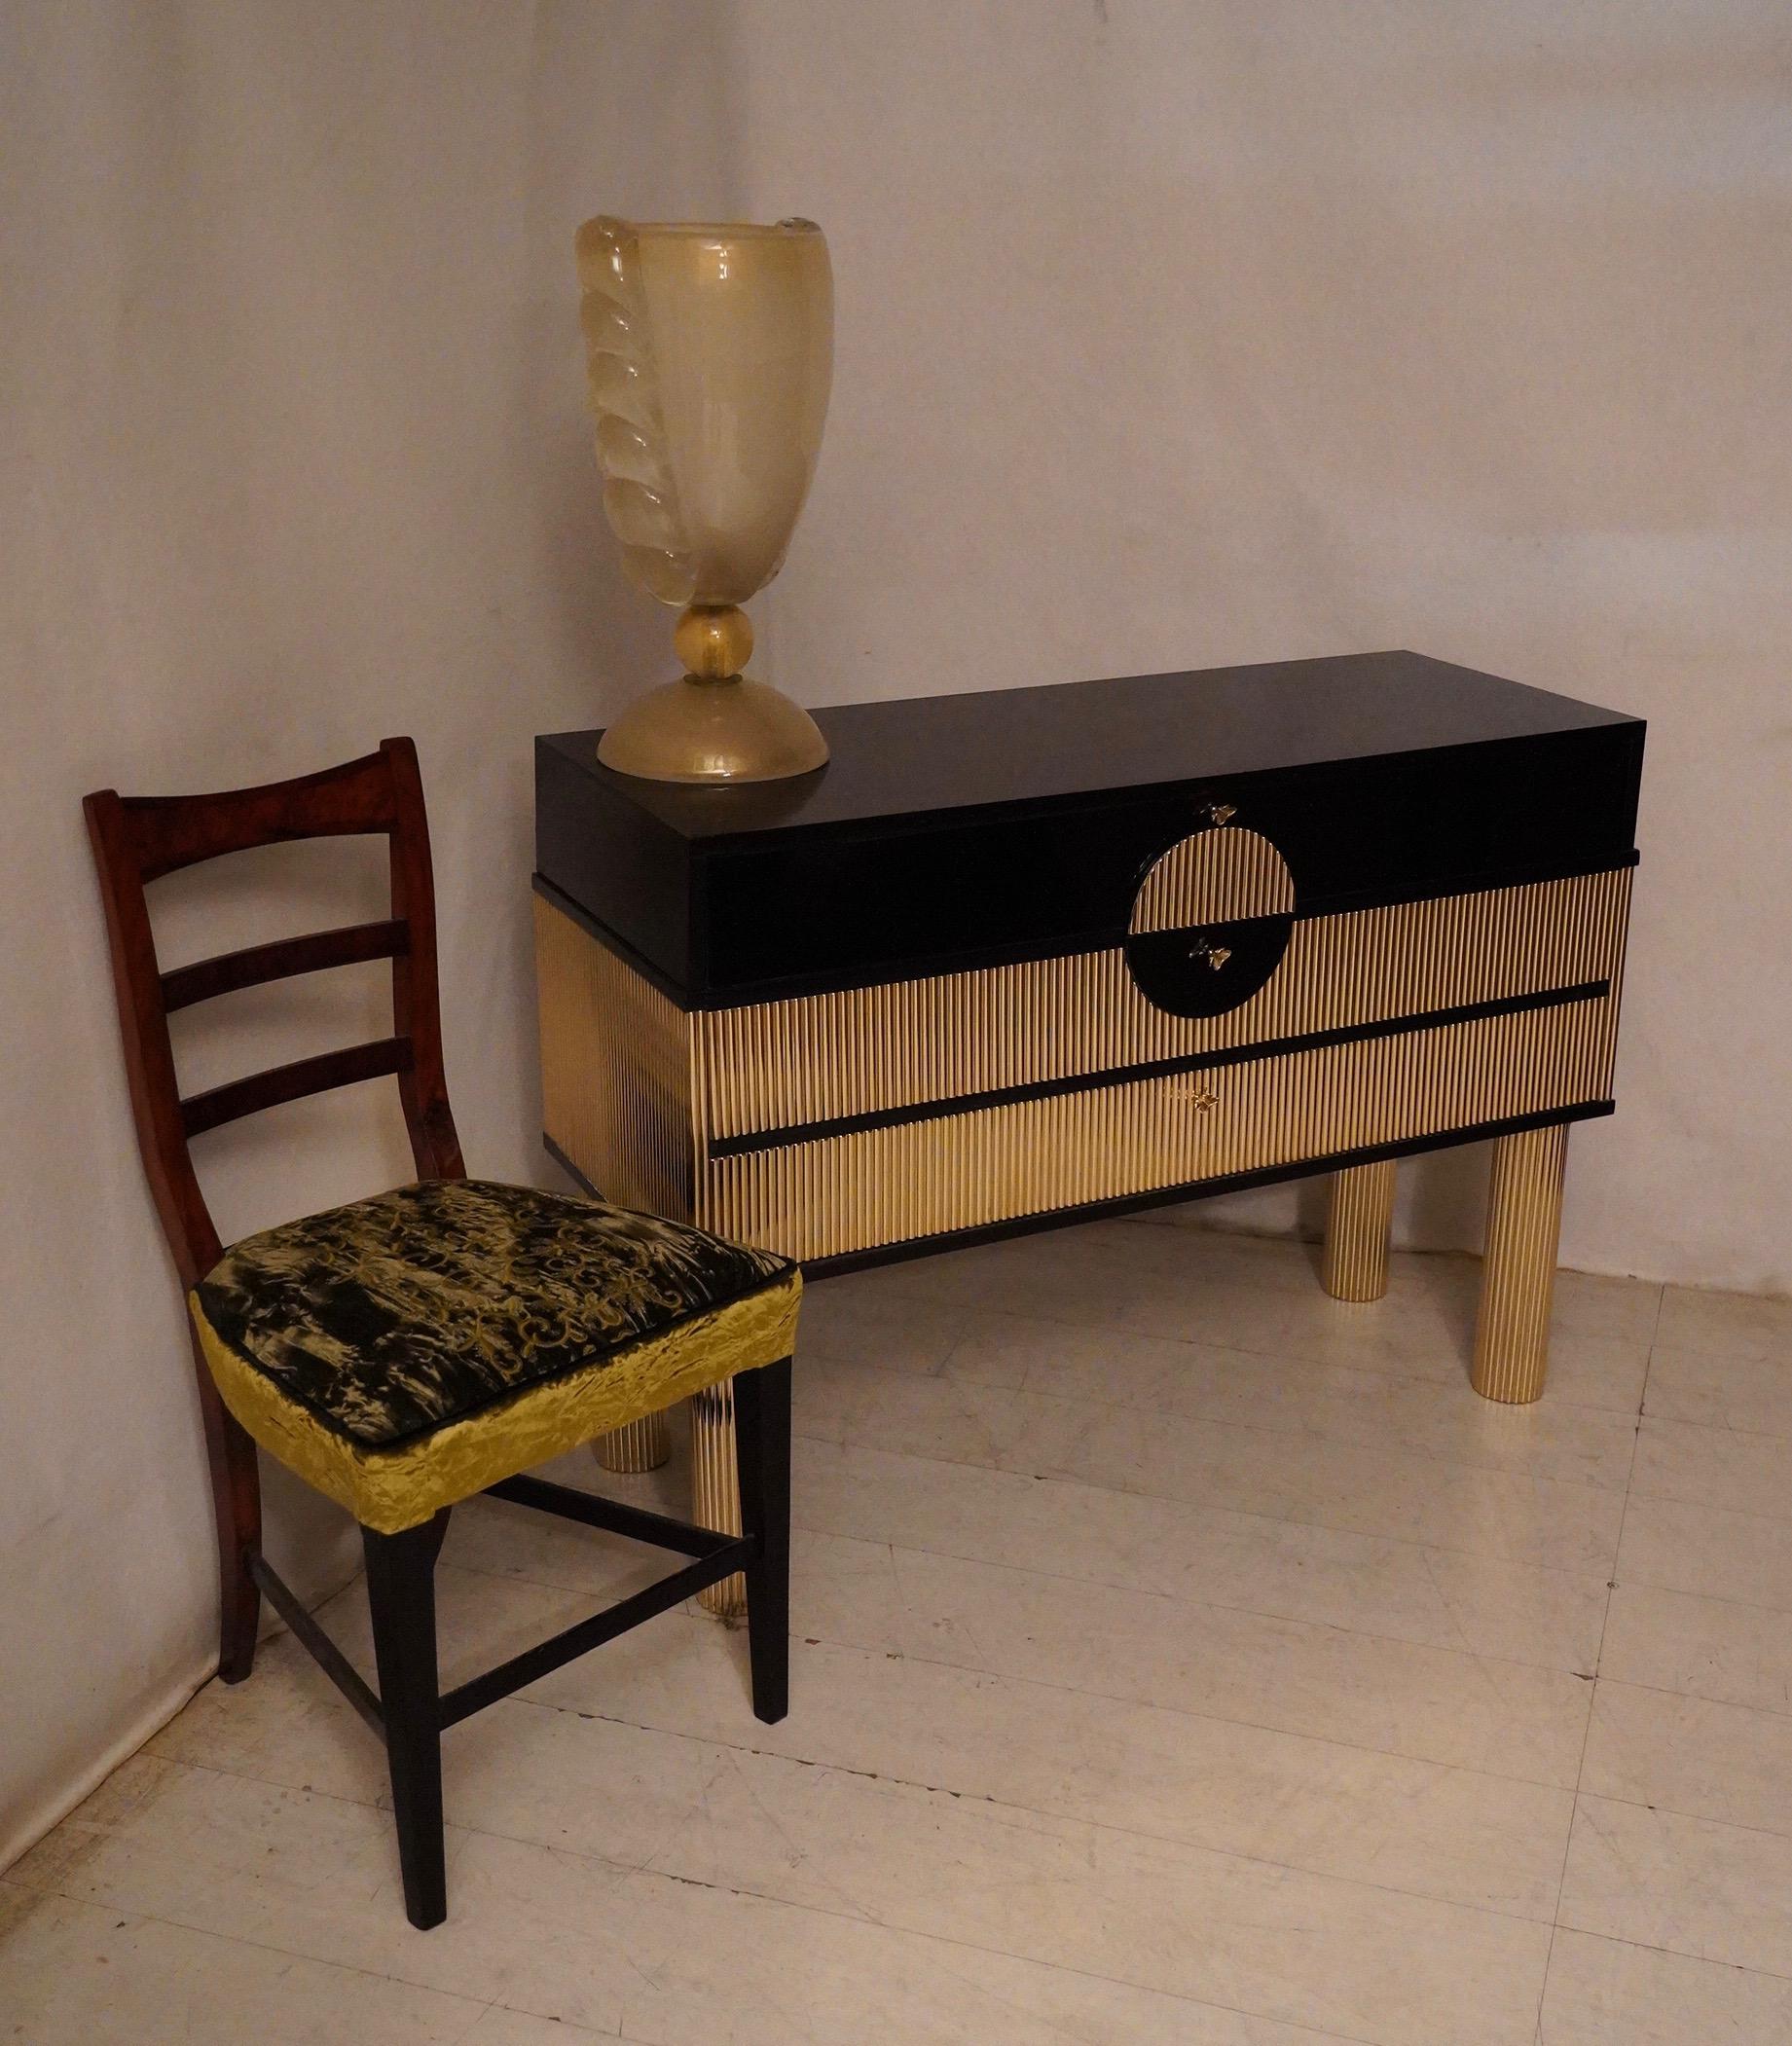 Very elegant and precious commodes in black shellac and half round brass small rods. A meticulous and painstaking workmanship for a chest of drawers with truly unique characteristics.

The chest of drawers has a wooden structure, it is completely